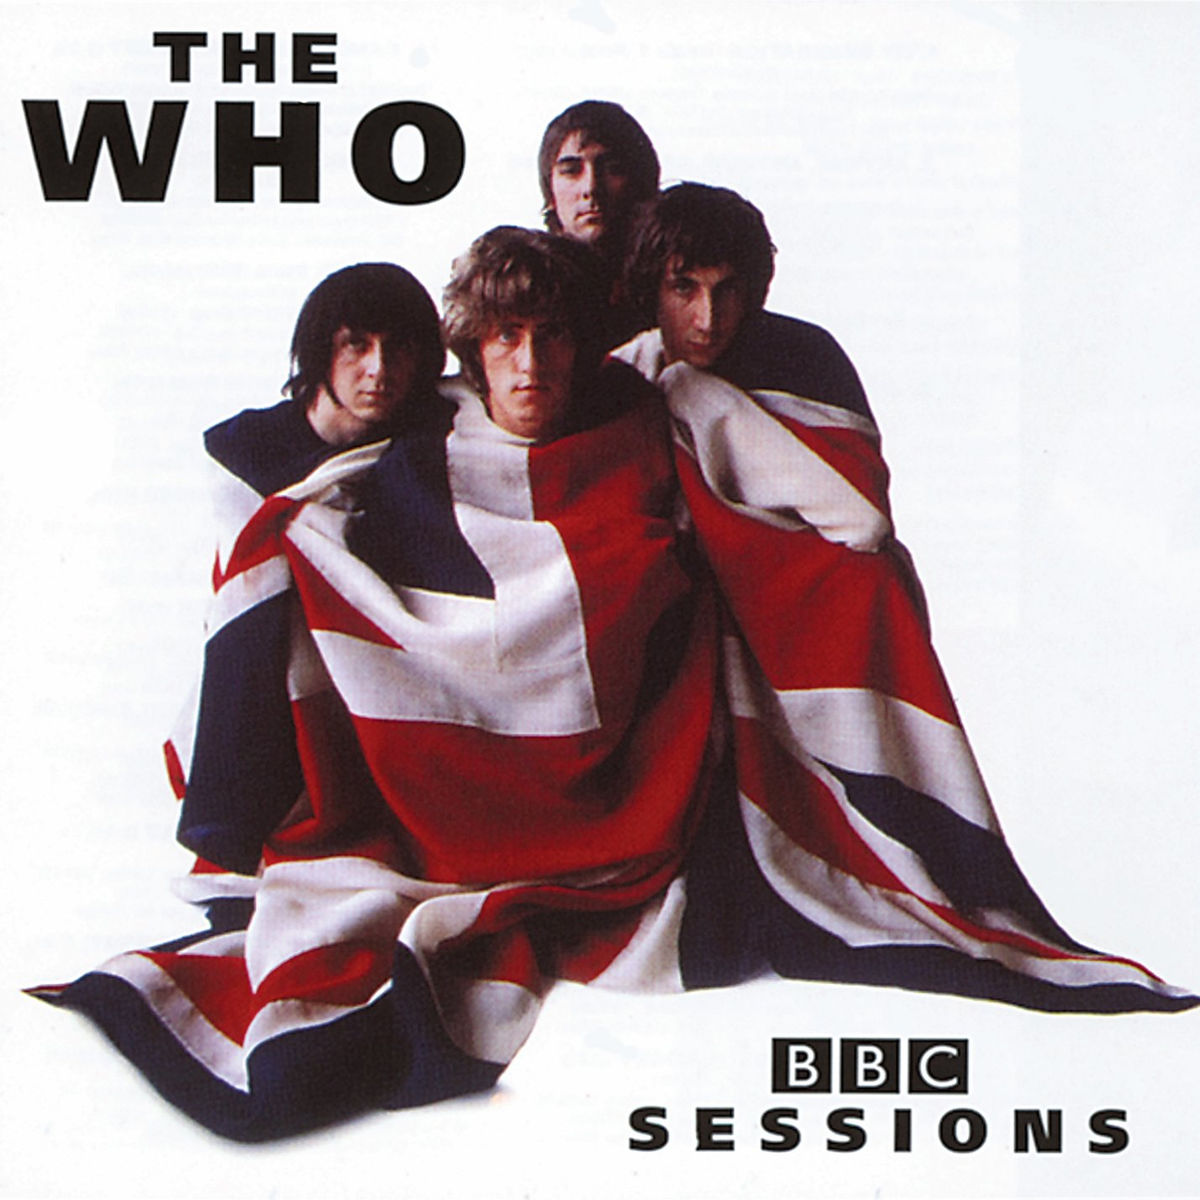 The Who - The BBC Sessions 2LP Vinyl